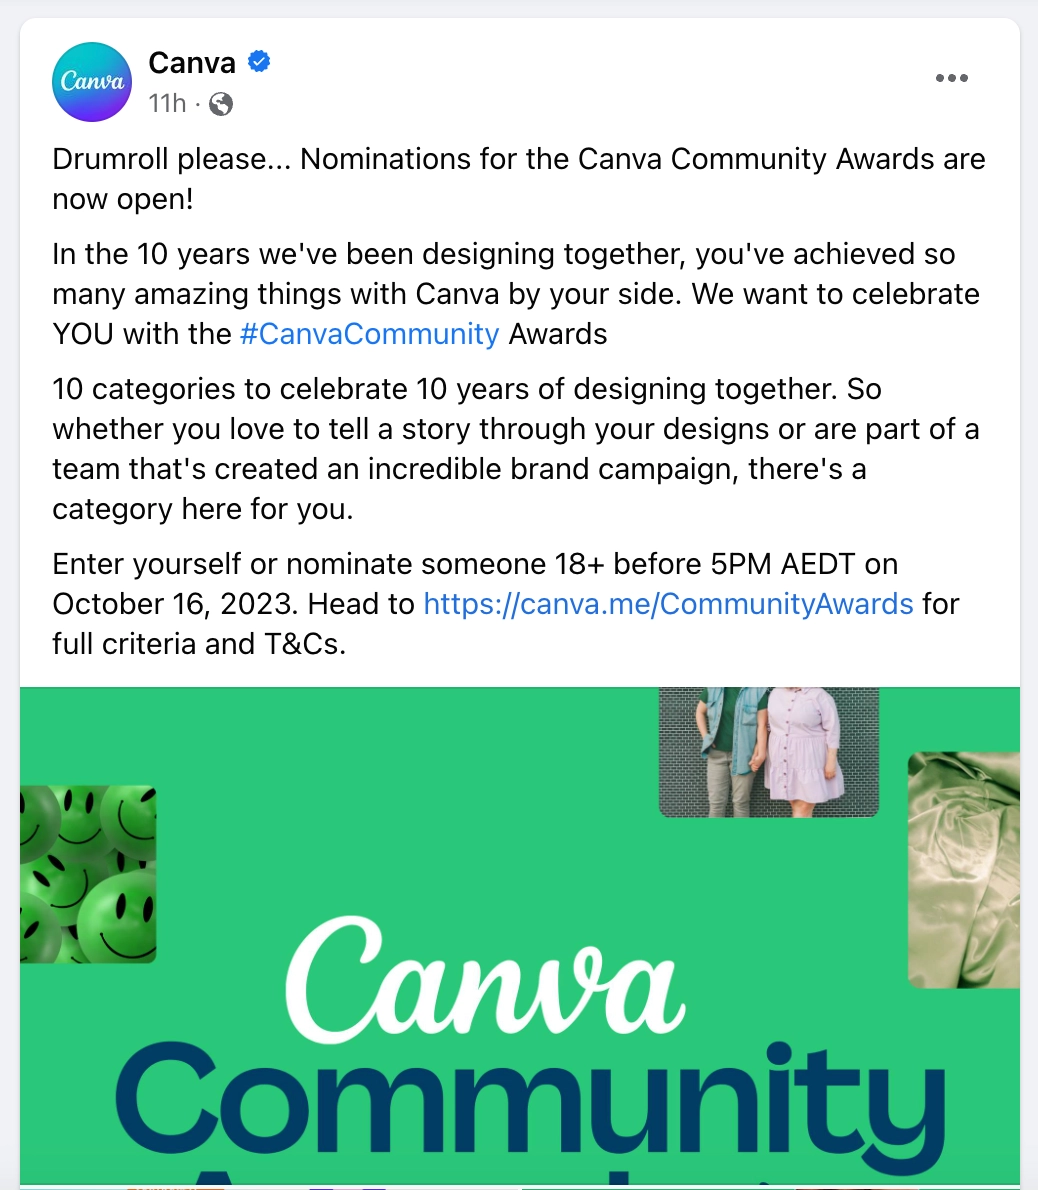 community awards by Canva as a form of UGC marketing